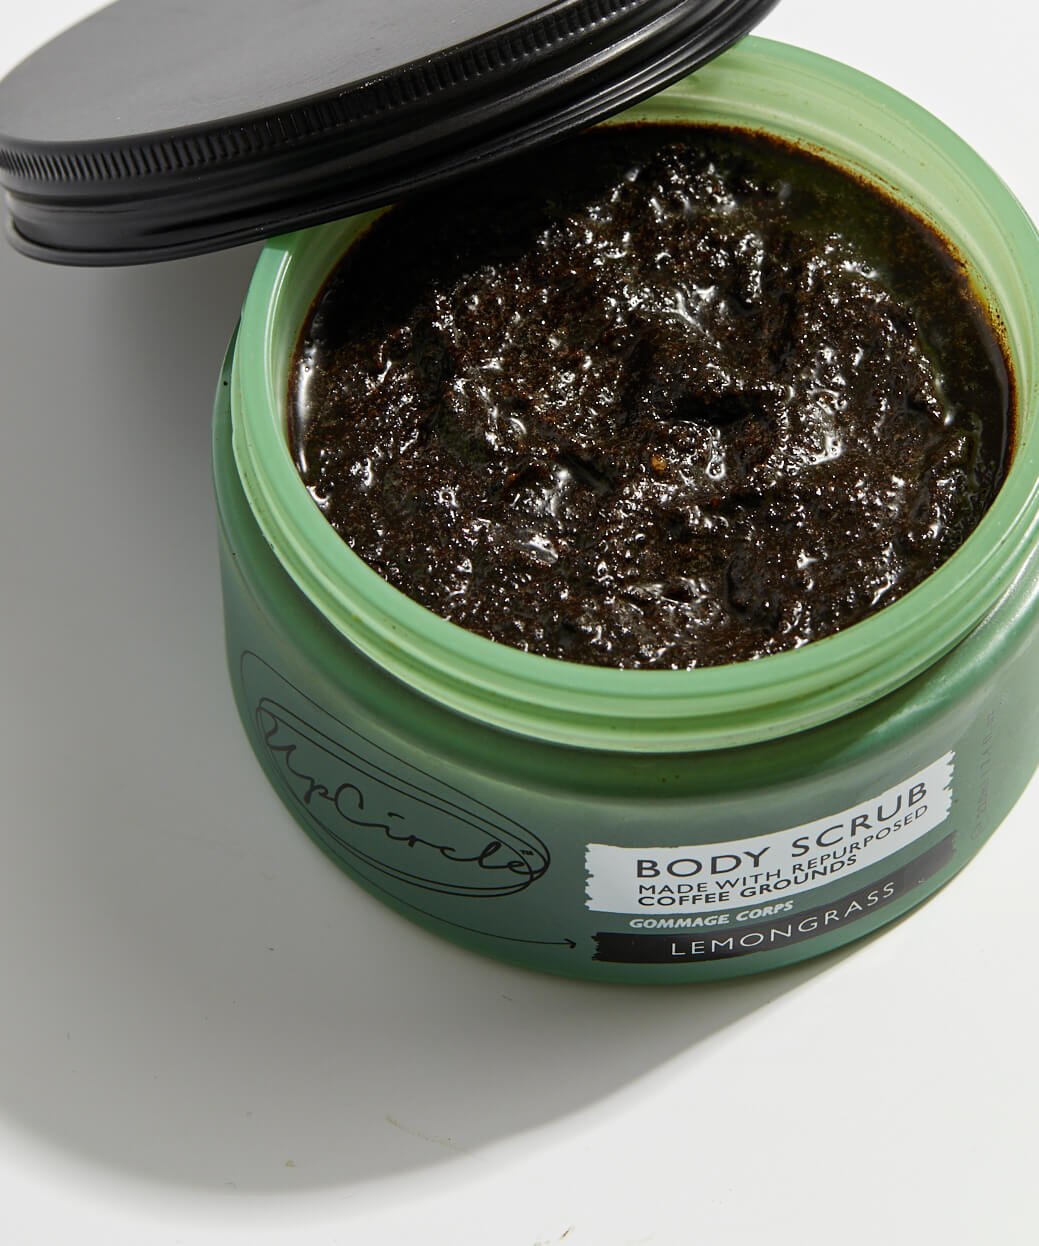 Glow-Inducing Body Scrubs | Glow Up With These Facial Scrubs Natural+Coffee+Body+Scrub+with+Lemongrass+UpCircle+Beauty